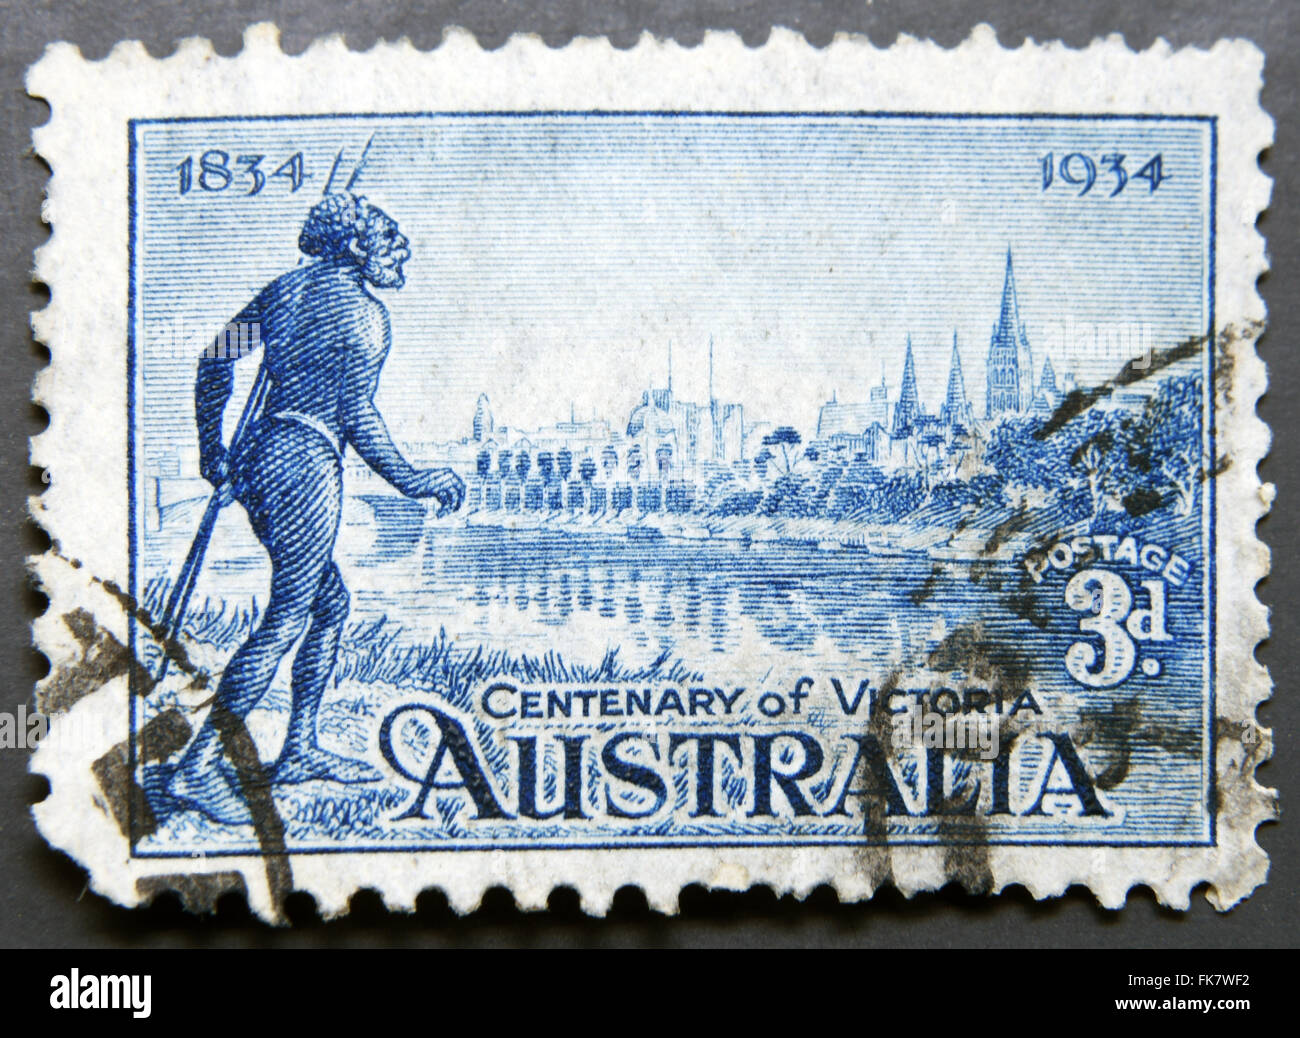 AUSTRALIA - CIRCA 1934: Stamp printed in Australia shows the Yarra Yarra Tribesman, Yarra River and View of Melbourne, Centenary Stock Photo